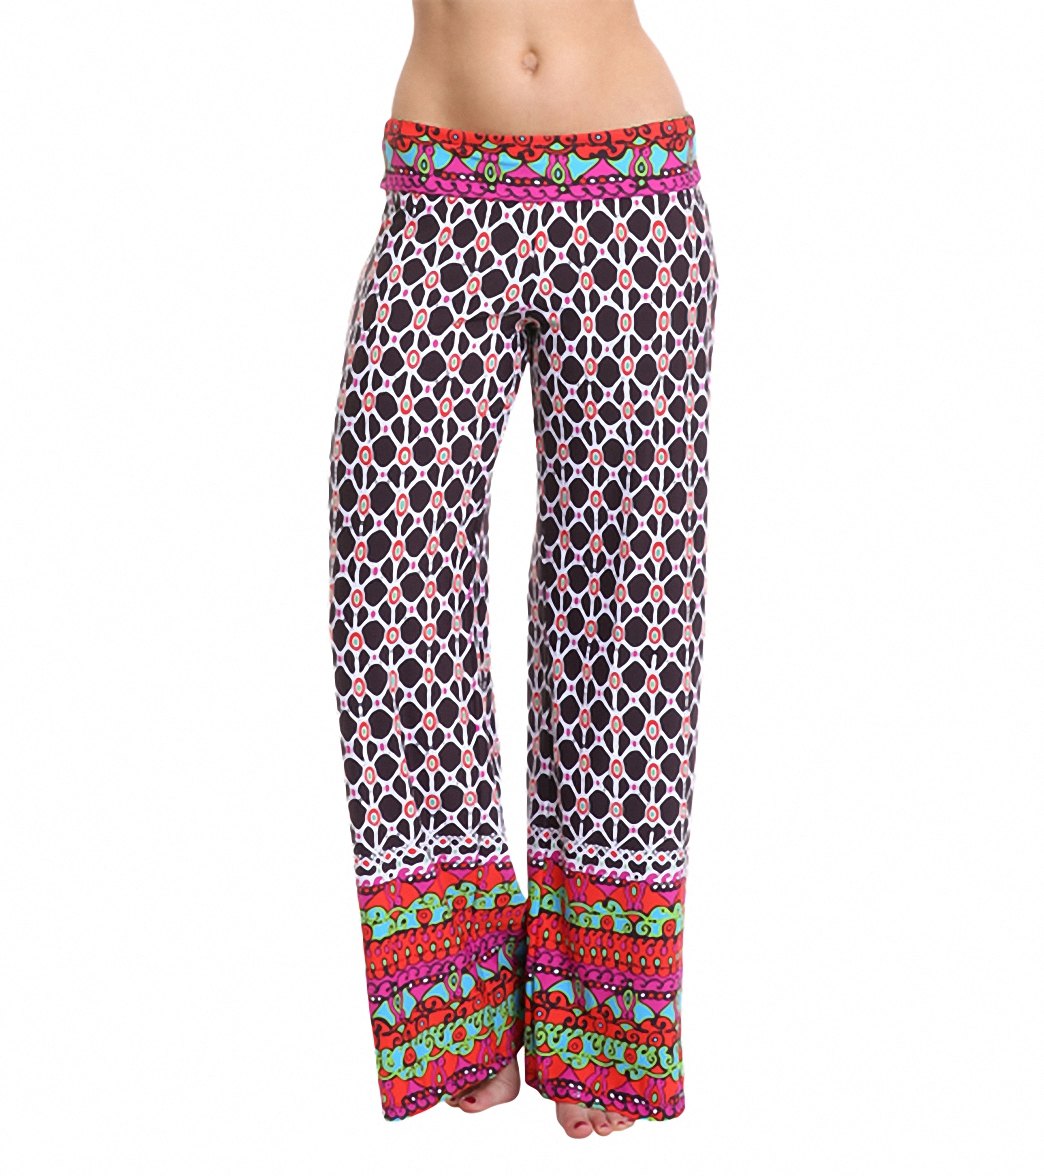 Trina Turk Venice Beach Roll Top Pant at SwimOutlet.com - Free Shipping